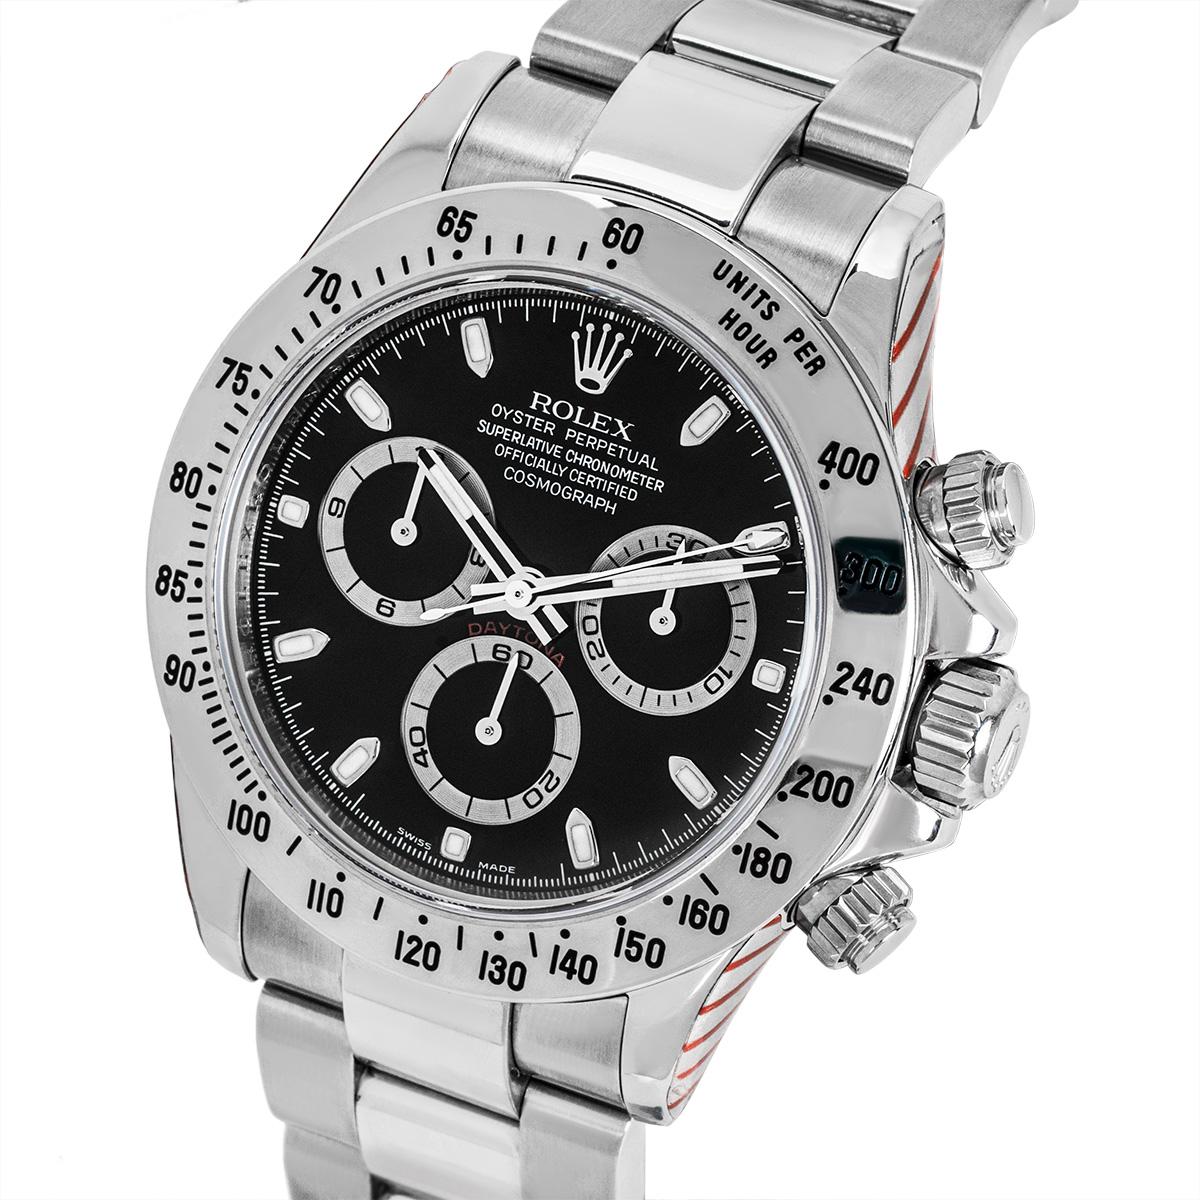 Rolex Daytona Black Dial 116520 In Excellent Condition For Sale In London, GB